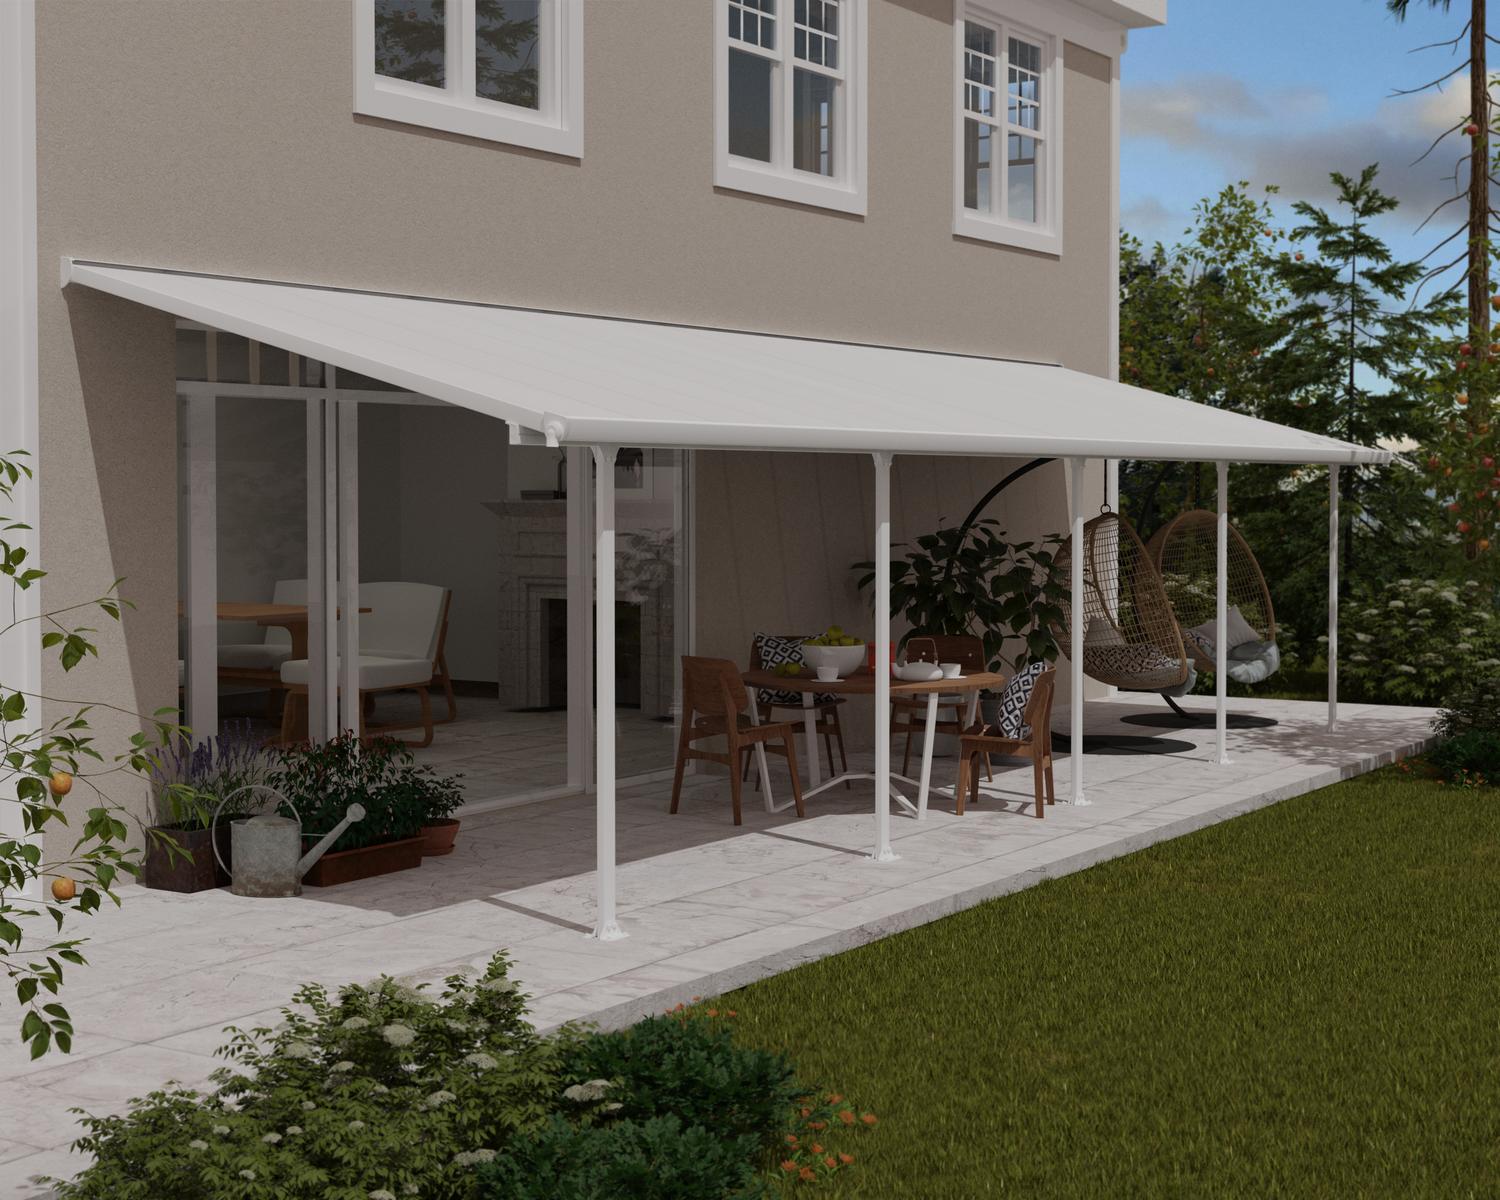 Aluminium White Patio Cover 10 ft. x 32 ft. with polycarbonate roof panels, attached to the patio house to protect on garden furniture